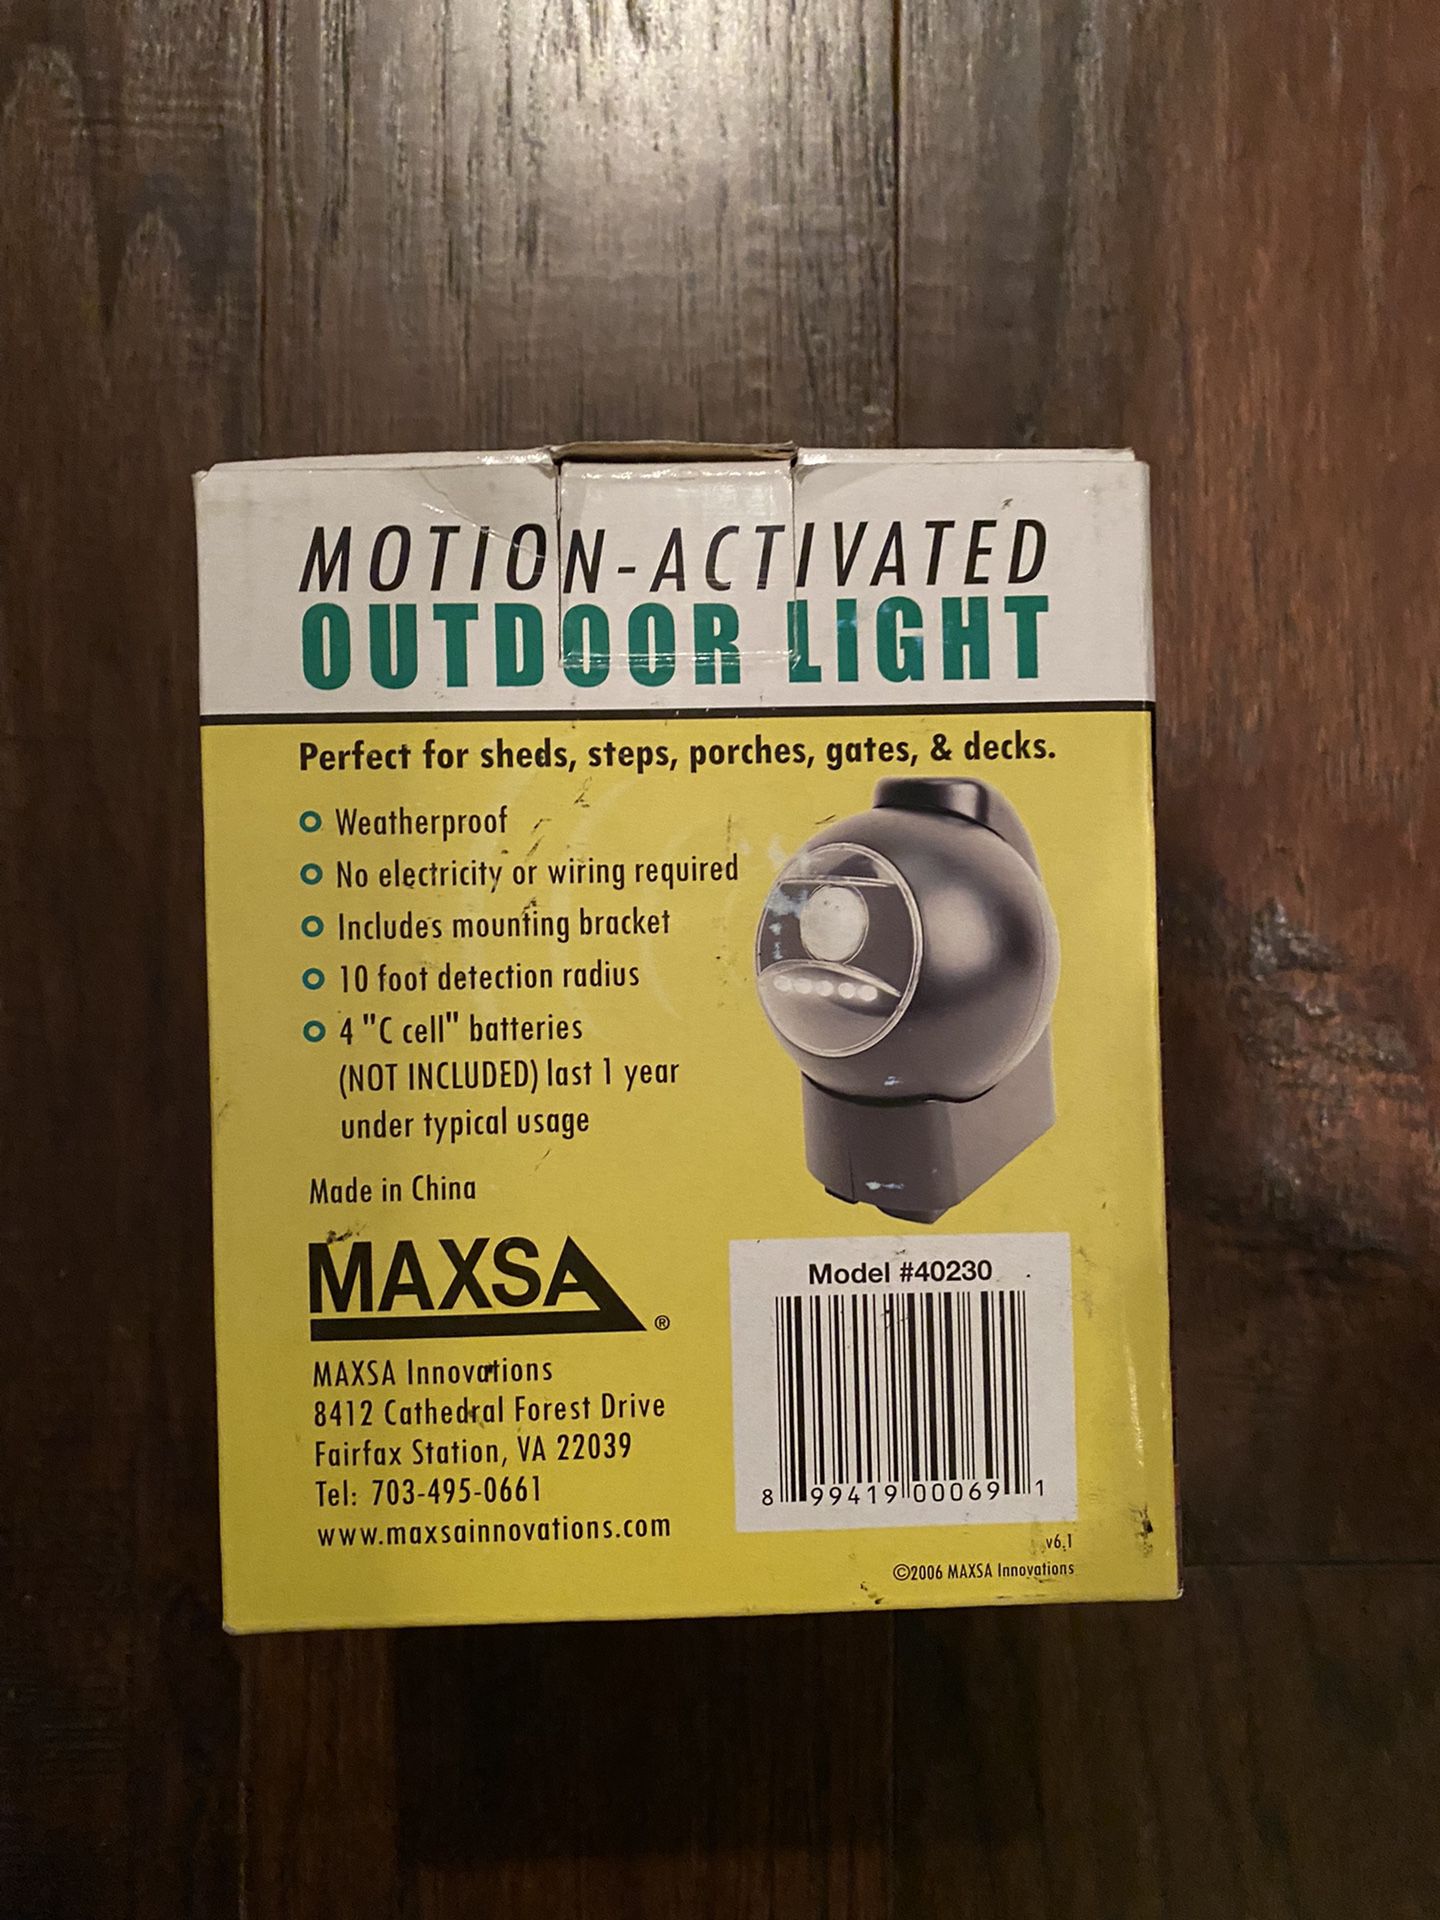 Motion activated outdoor light model 40230